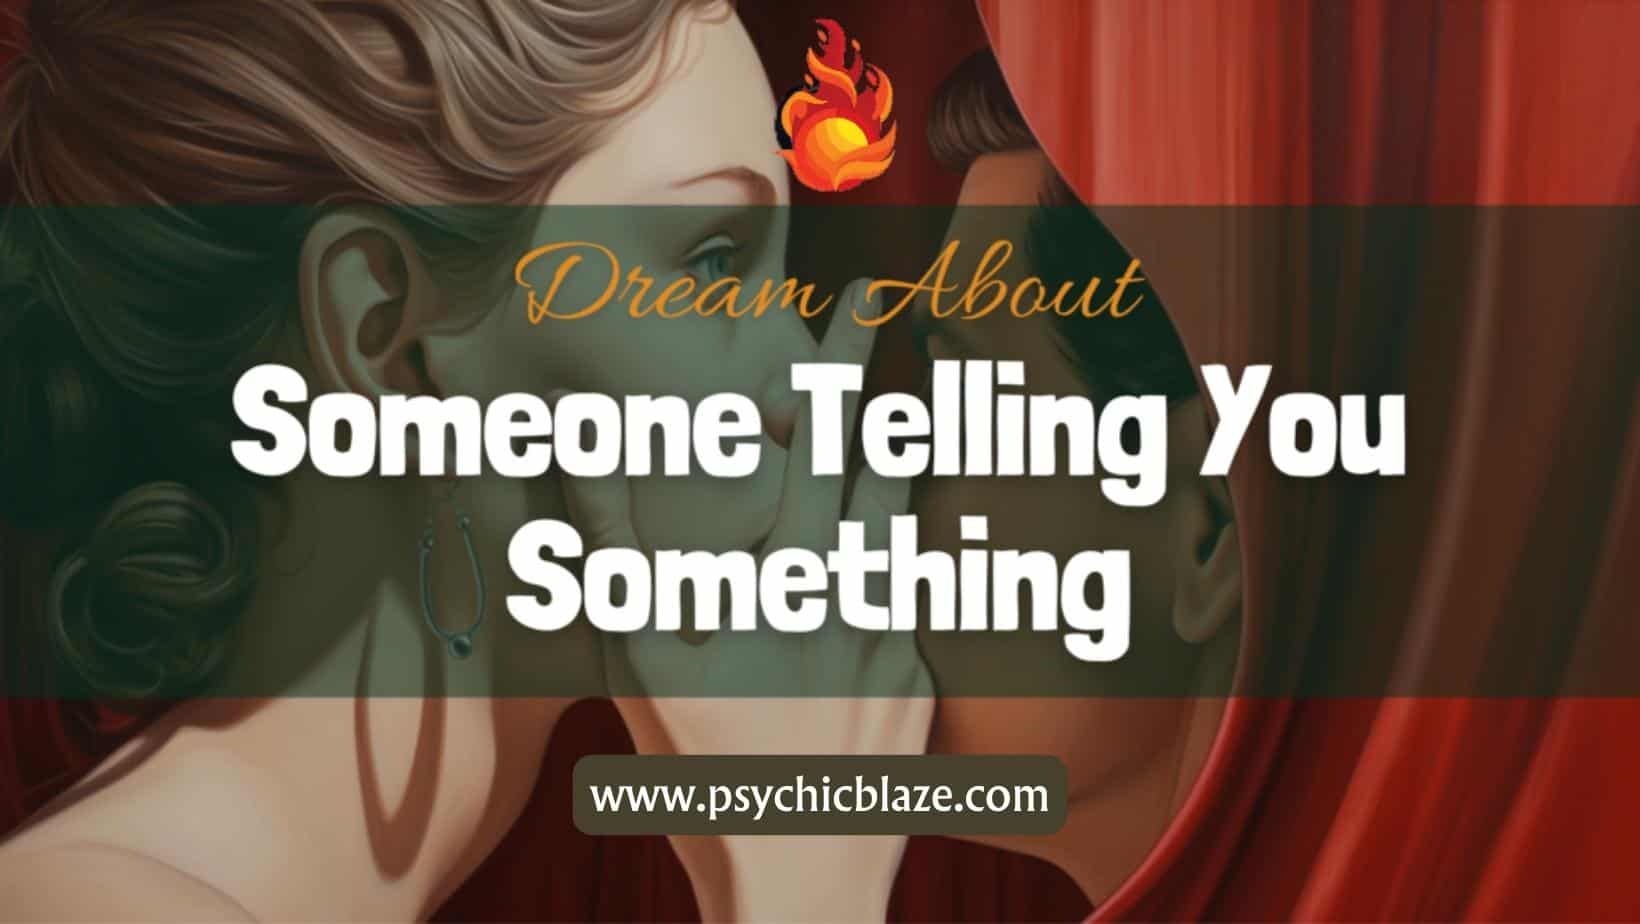 Dream about Someone Telling You Something